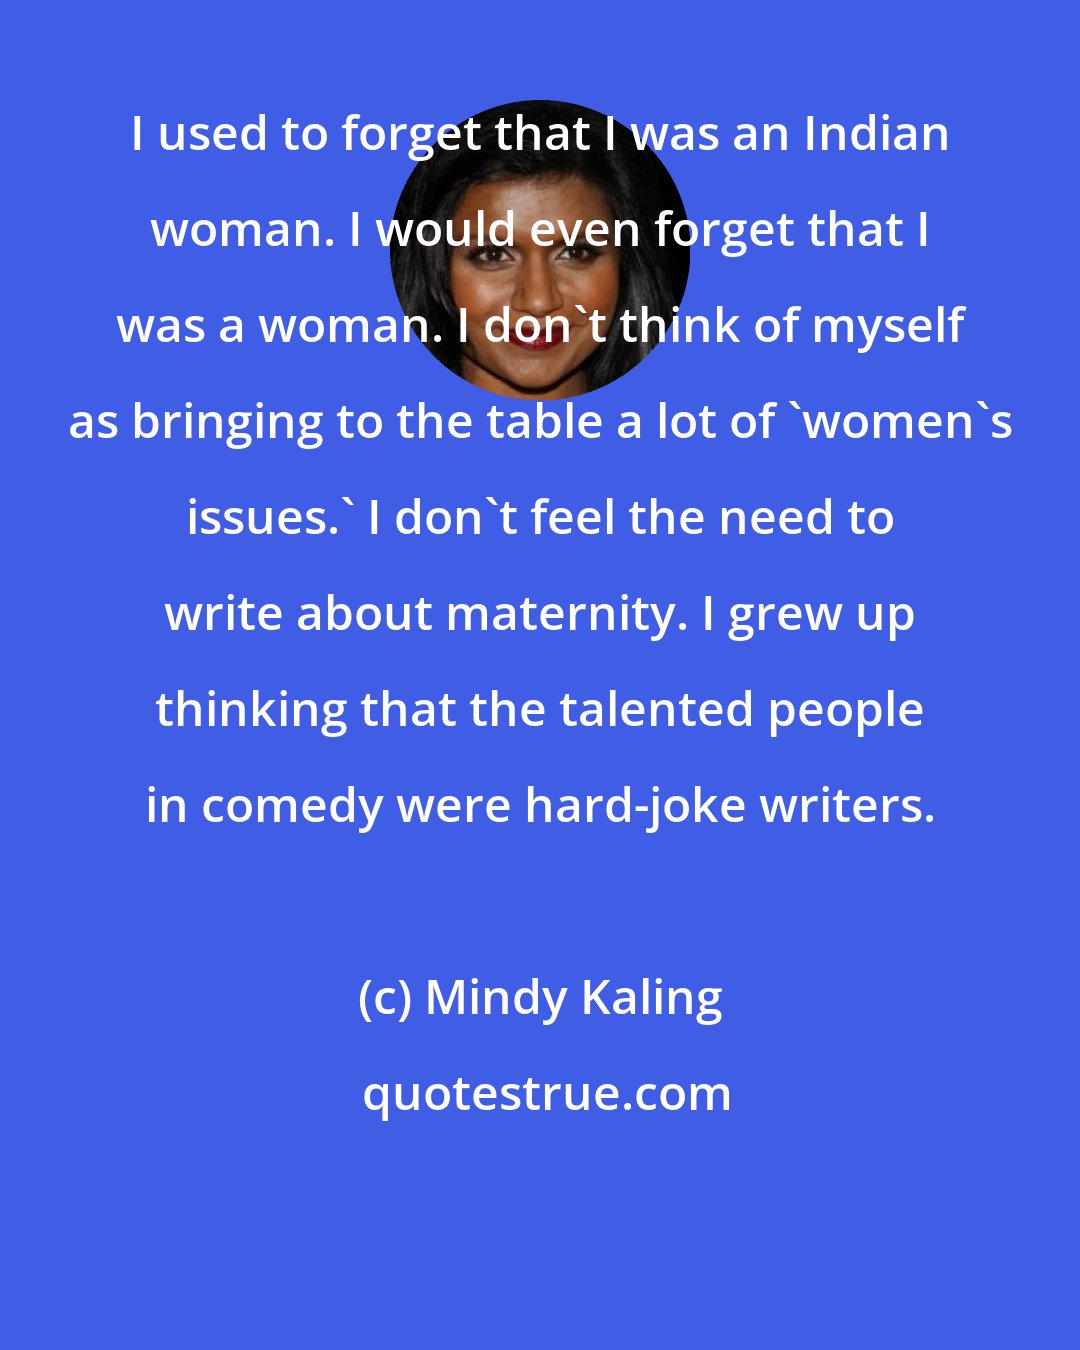 Mindy Kaling: I used to forget that I was an Indian woman. I would even forget that I was a woman. I don't think of myself as bringing to the table a lot of 'women's issues.' I don't feel the need to write about maternity. I grew up thinking that the talented people in comedy were hard-joke writers.